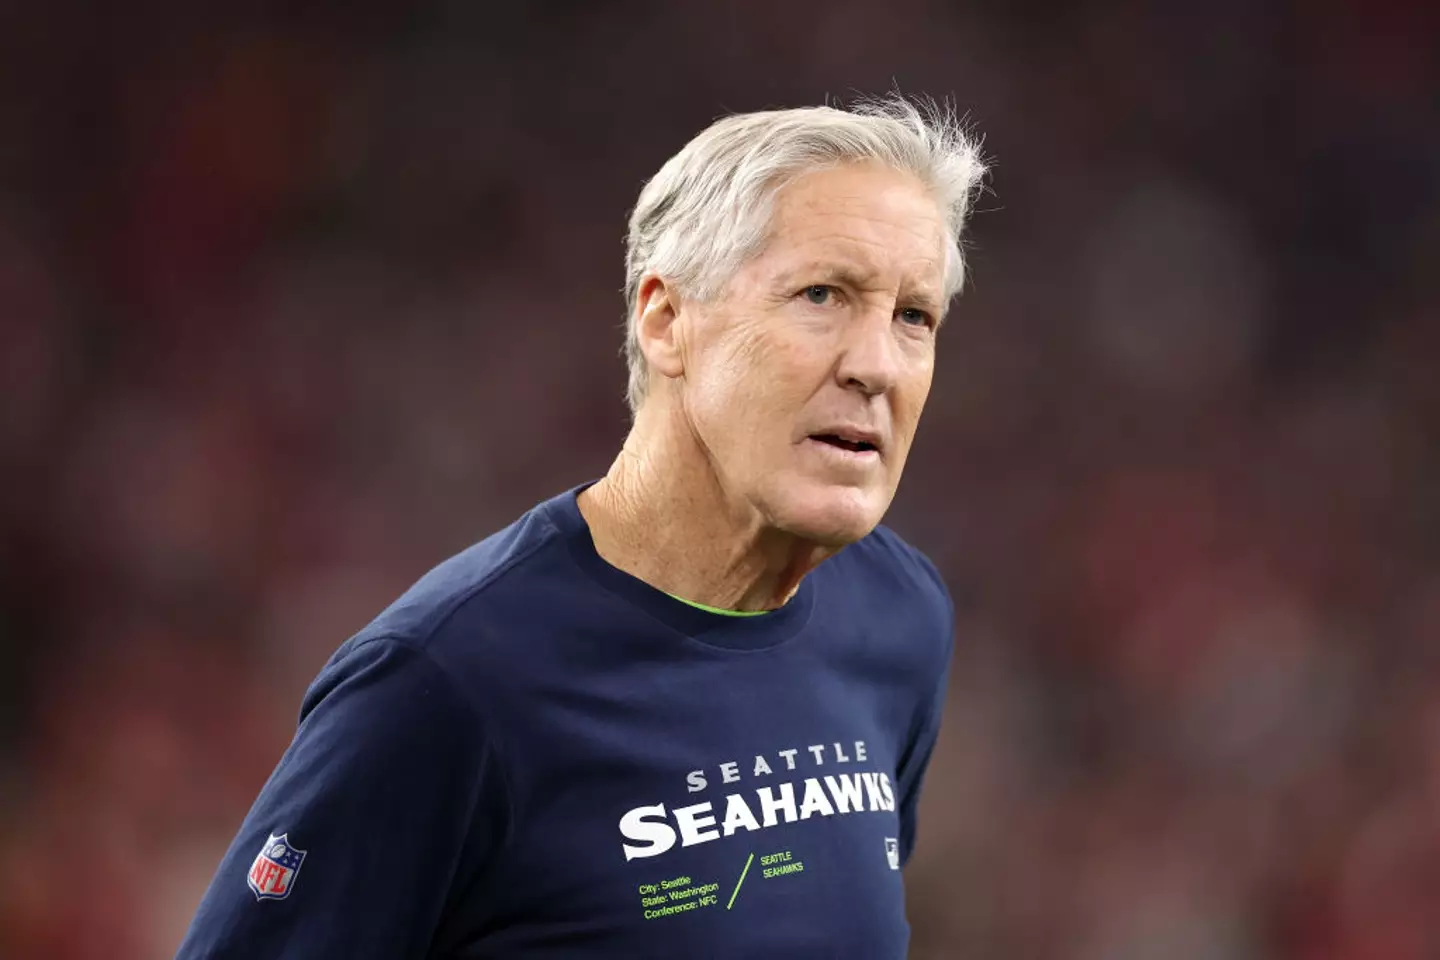 Pete Carroll left the Seattle Seahawks on Wednesday (Image: Getty)